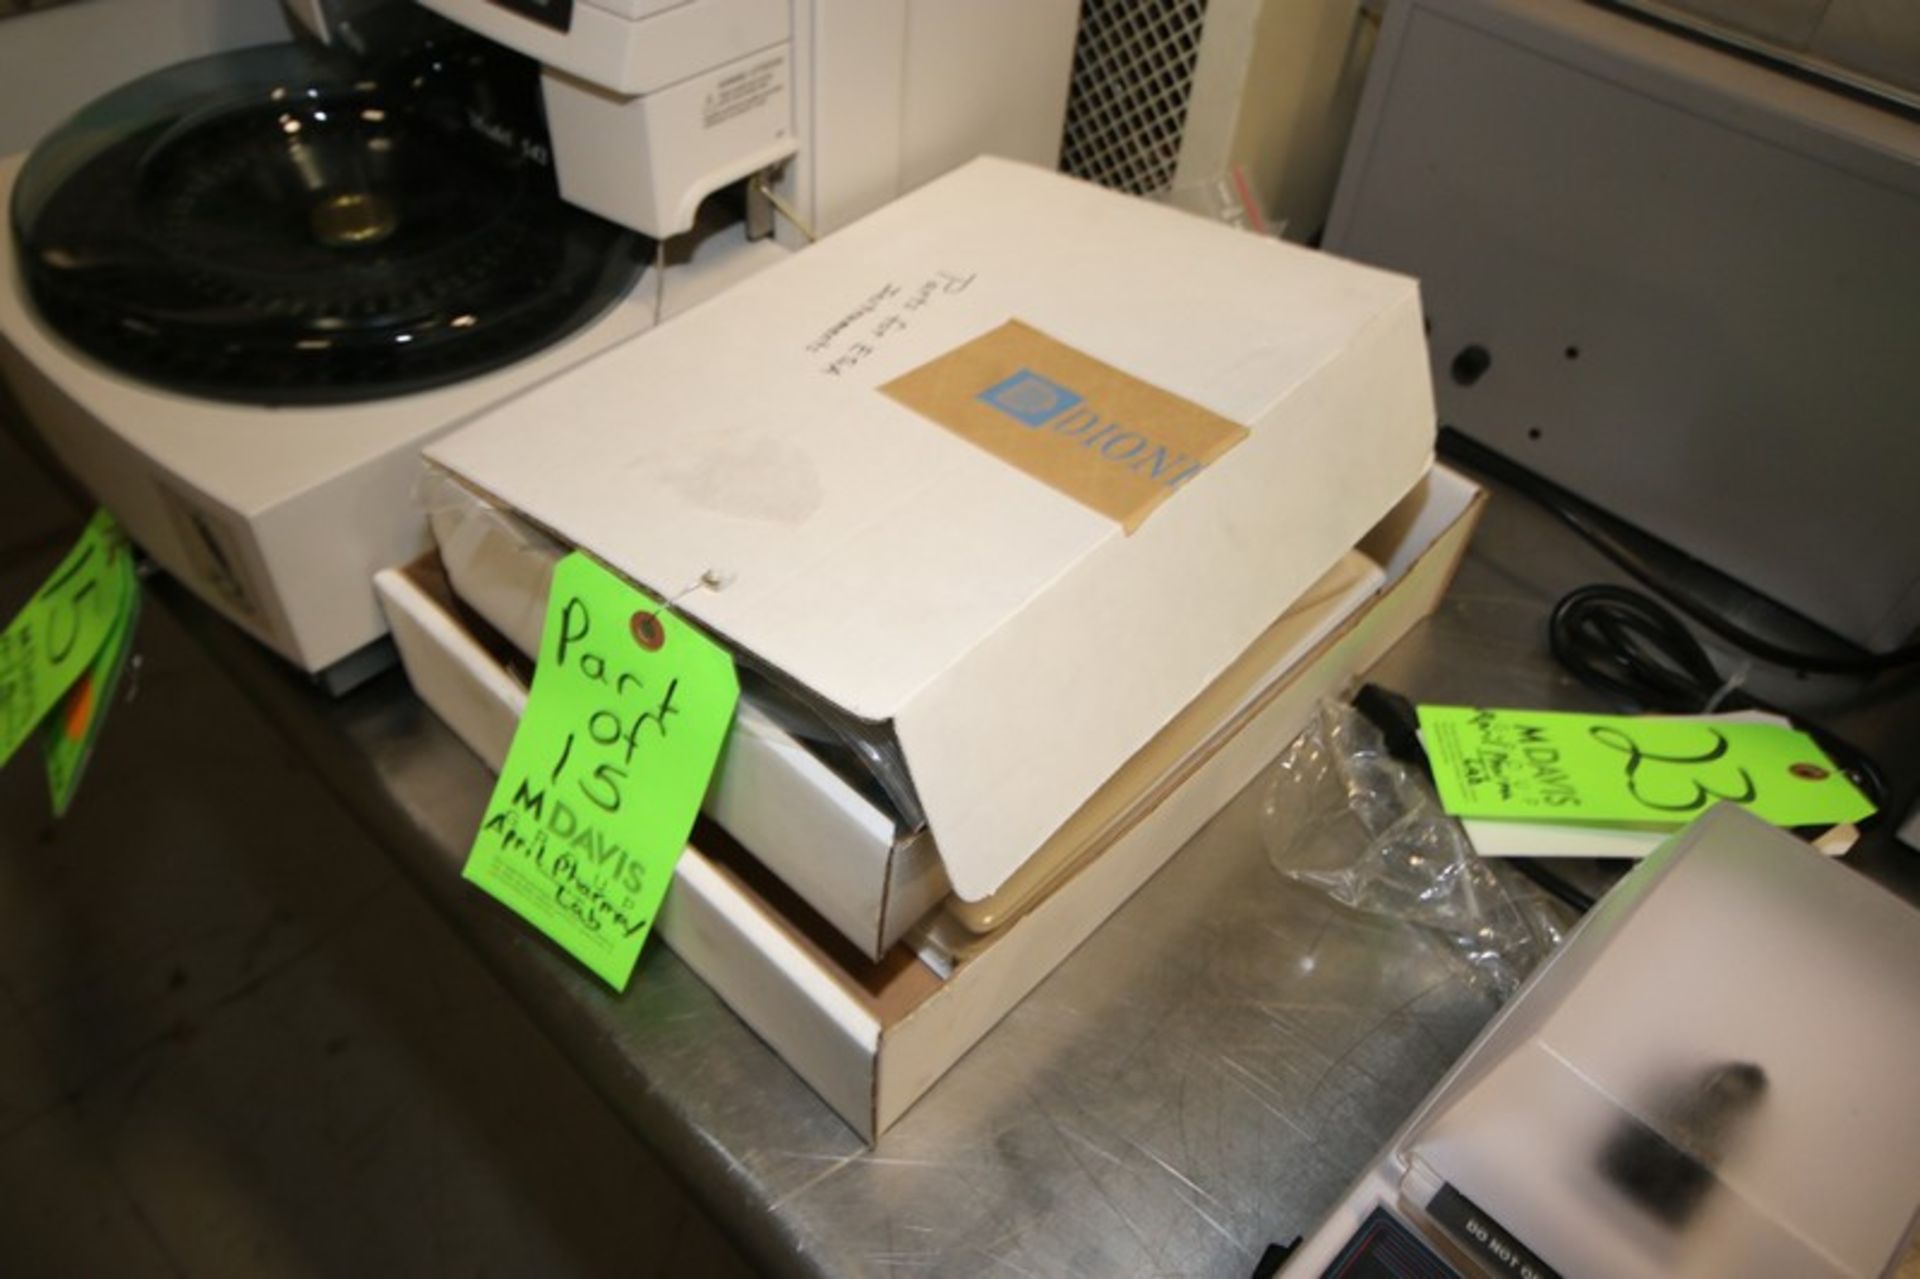 ESA Autosampler, Model 542, SN 70529, 230 / 115 V, Includes Supplies & Manuals - Image 4 of 4